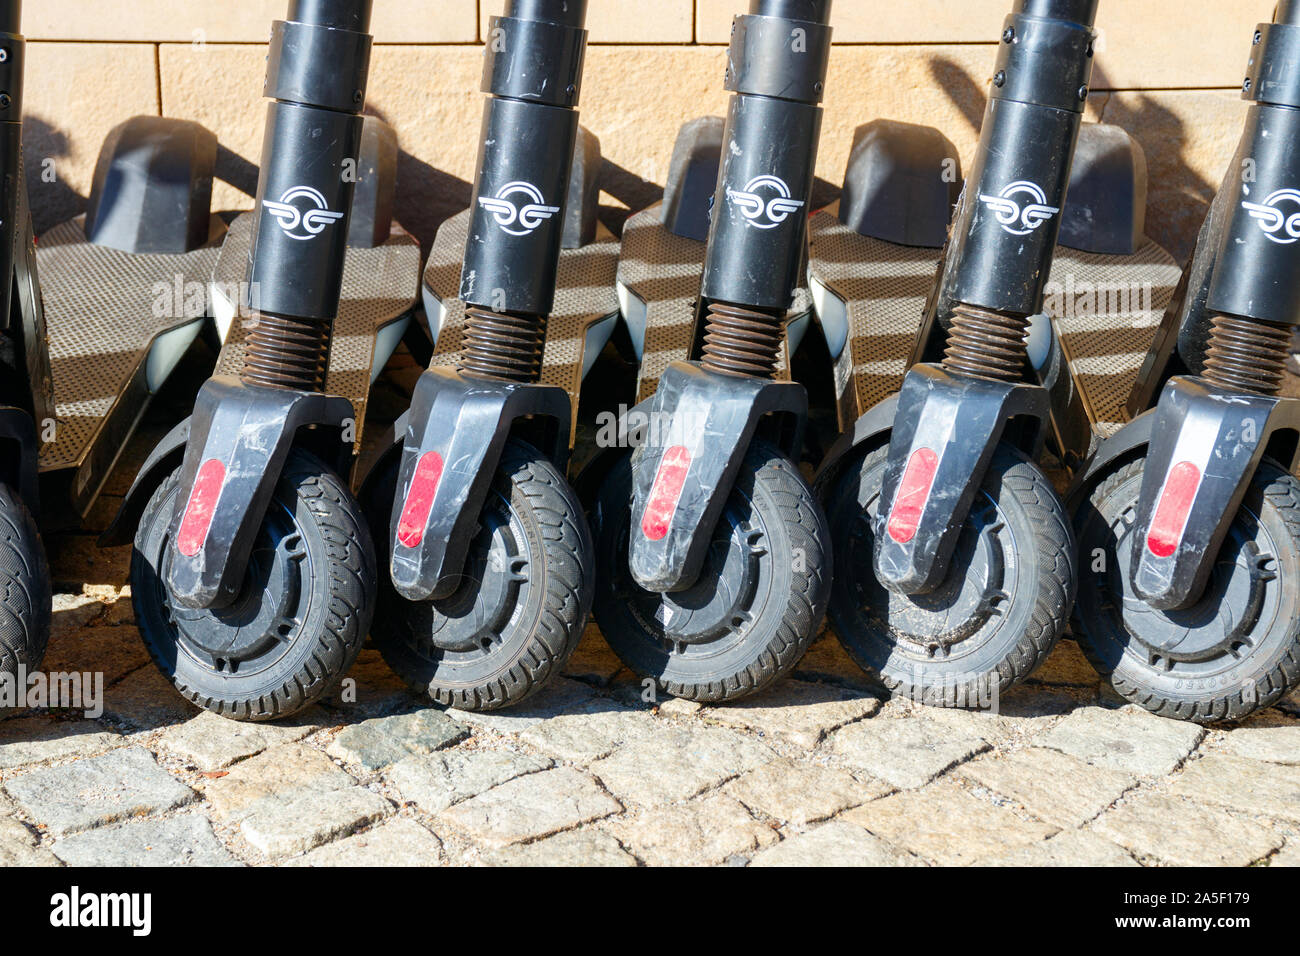 WROCLAW, POLAND - OCTOBER 6, 2019: Frontal view of five used model Bird Zero electric scooter (E-Scooters) frames from Bird parked near a wall. Stock Photo